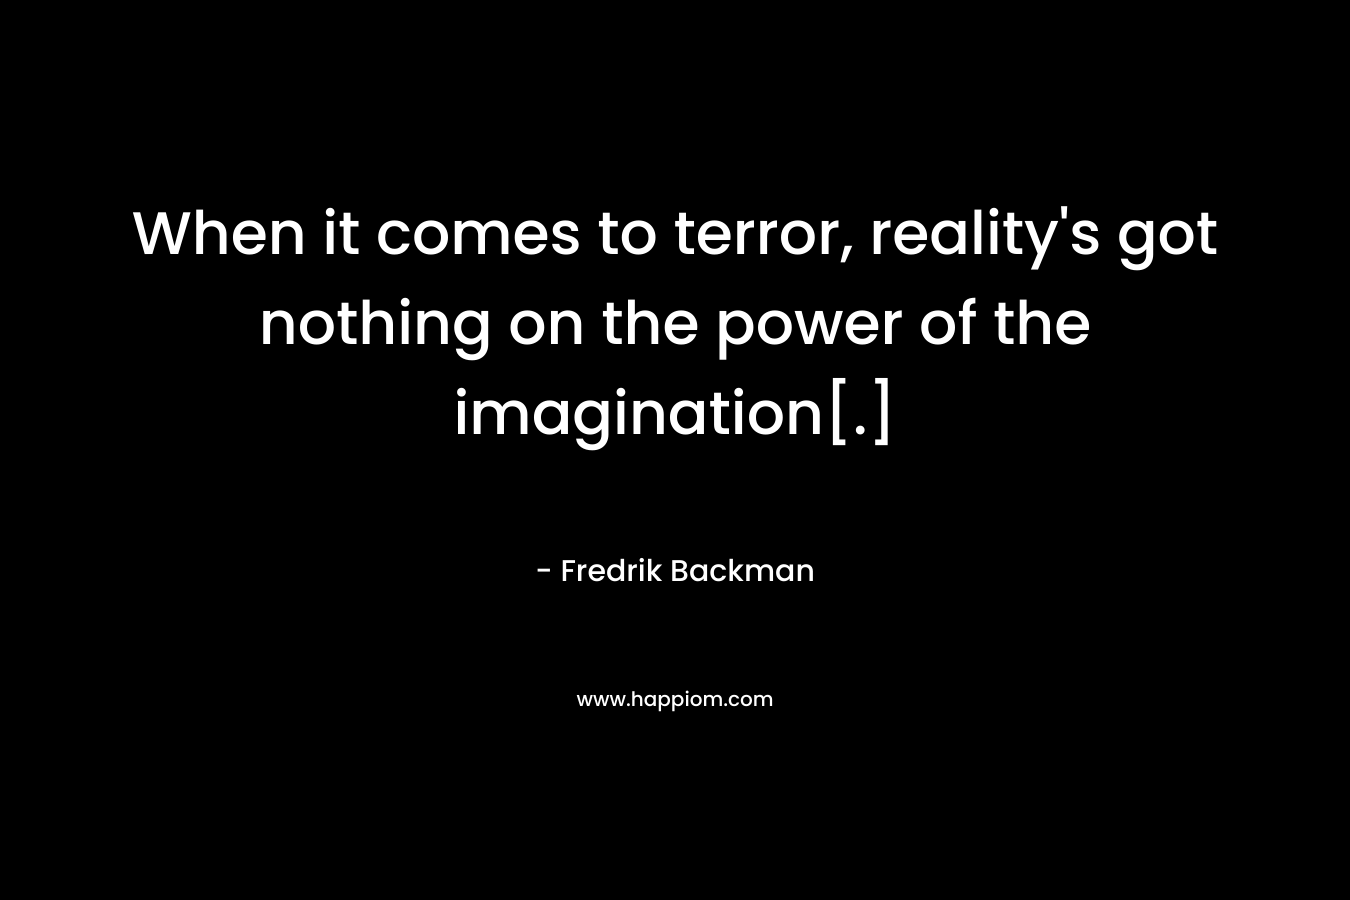 When it comes to terror, reality's got nothing on the power of the imagination[.]